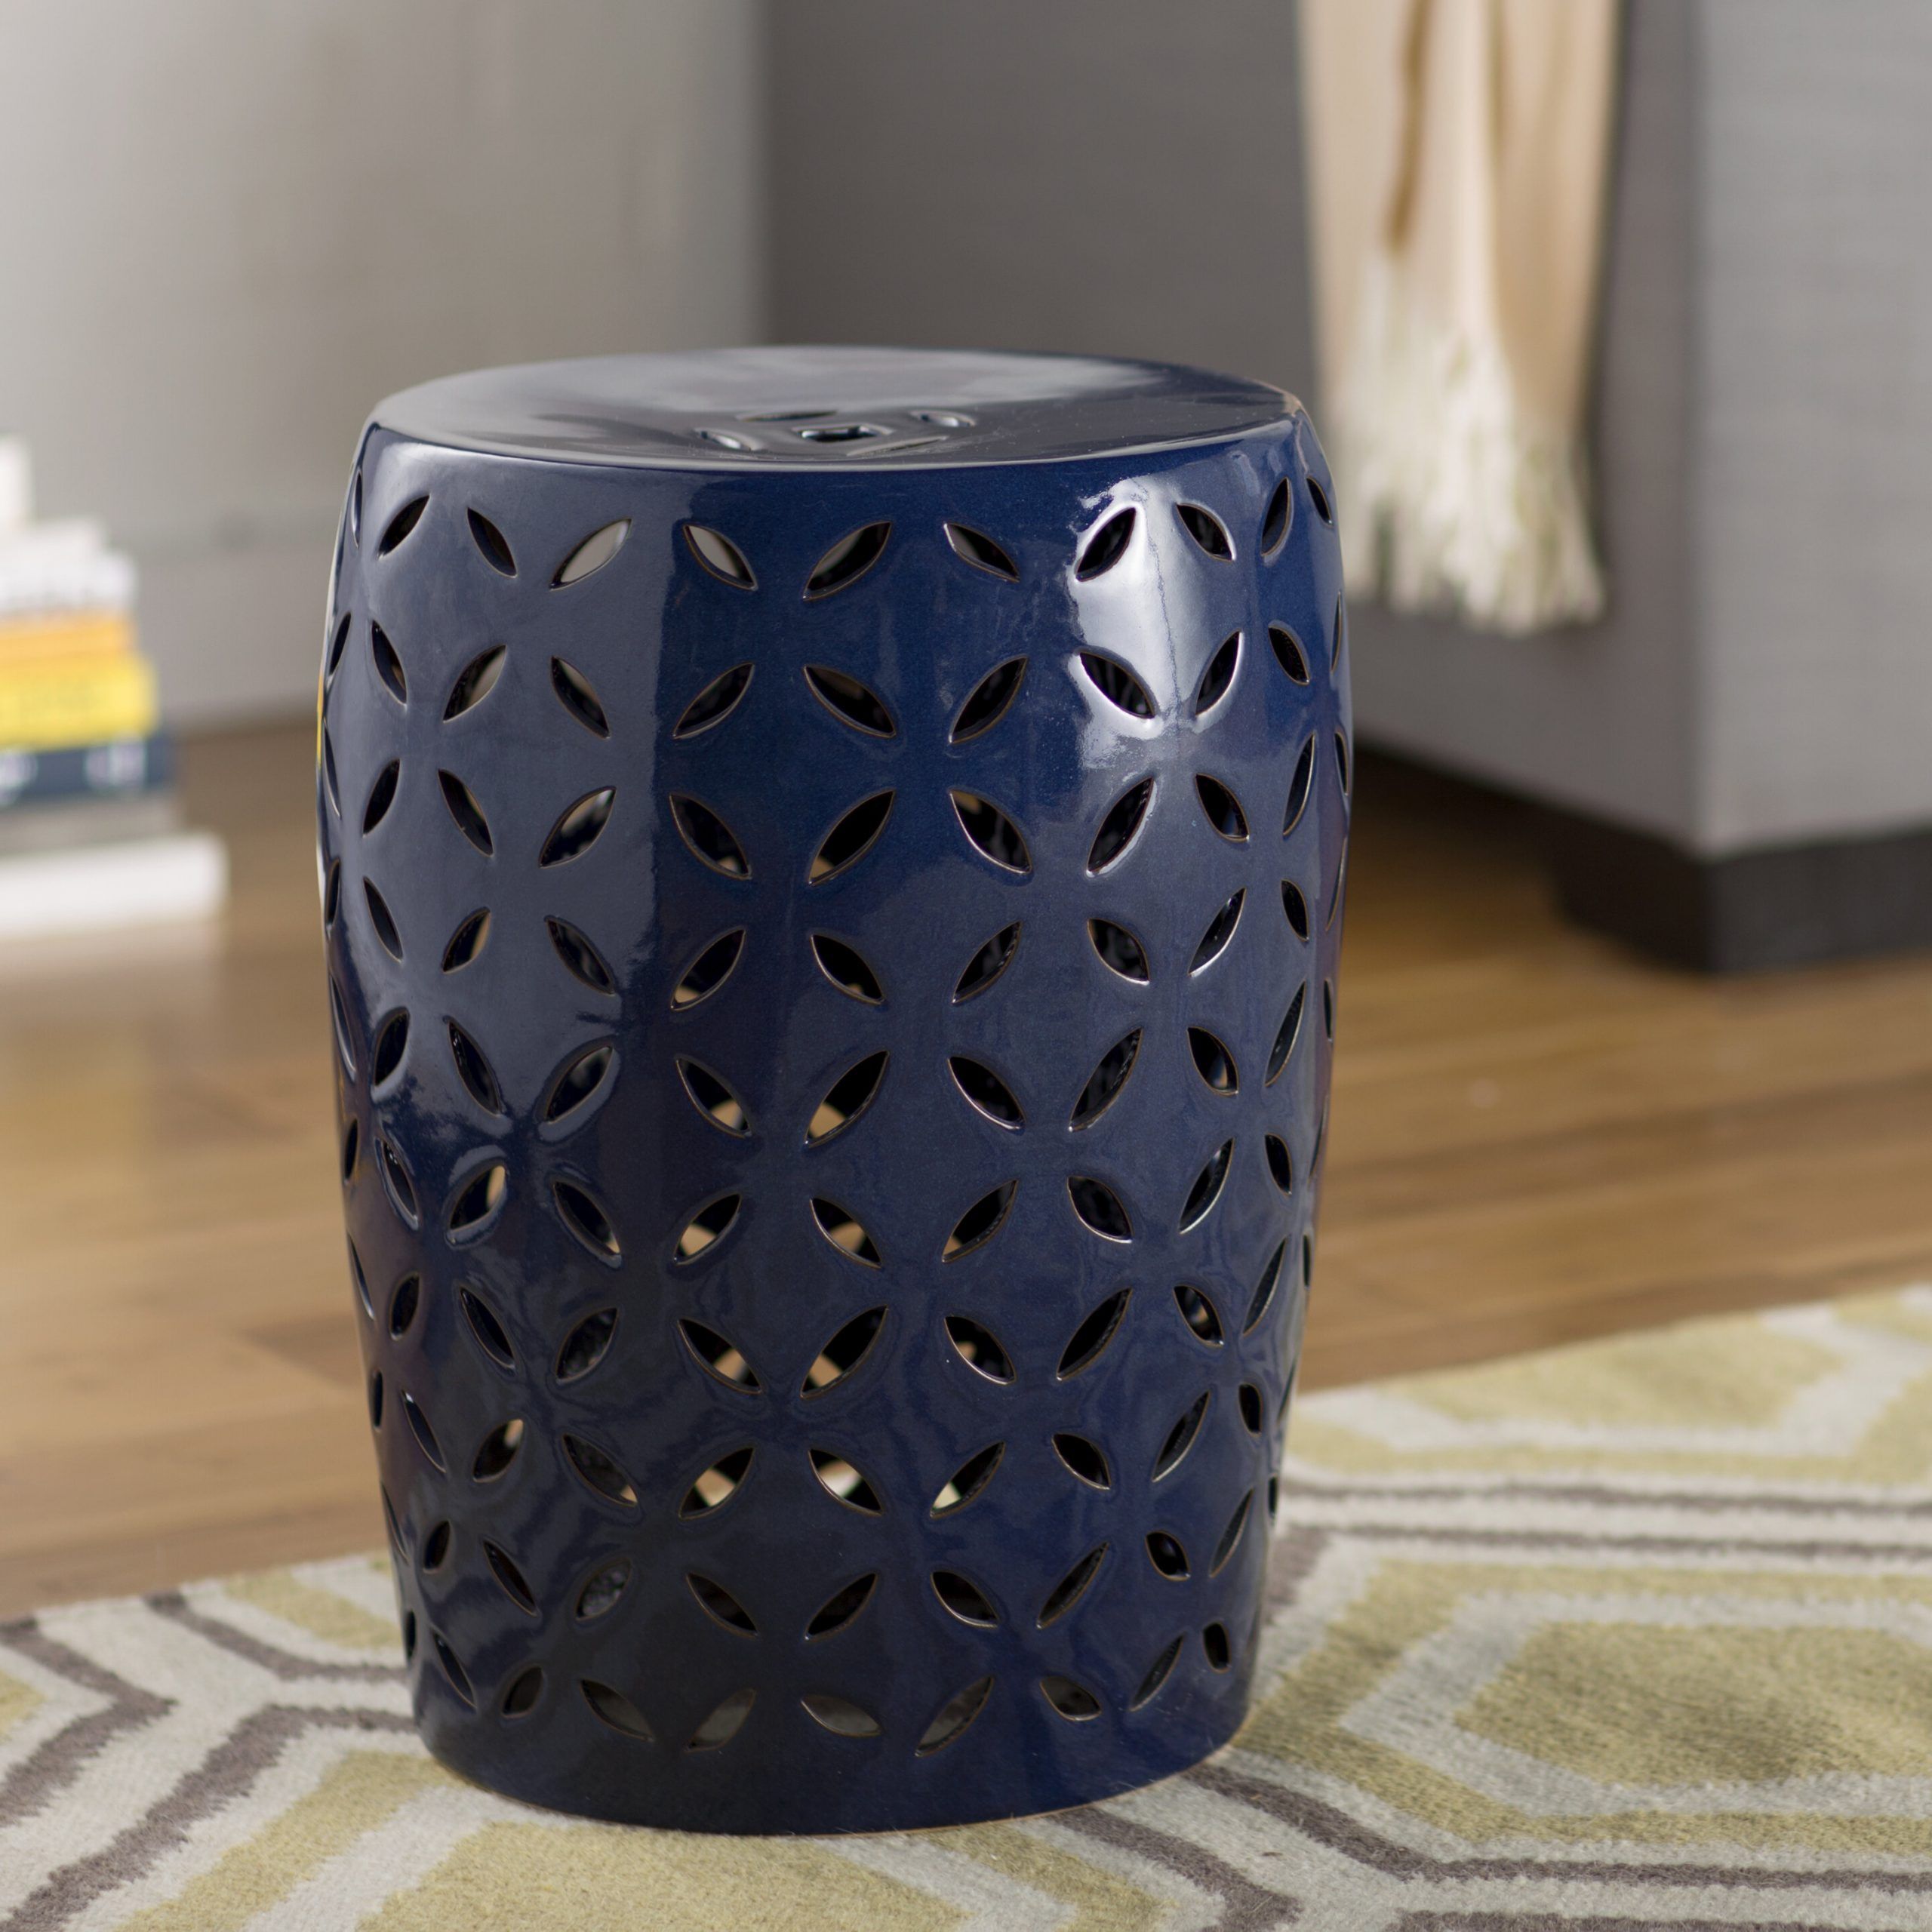 Newest Hermione Accent Stool Pertaining To Beckemeyer Ceramic Garden Stools (View 5 of 30)